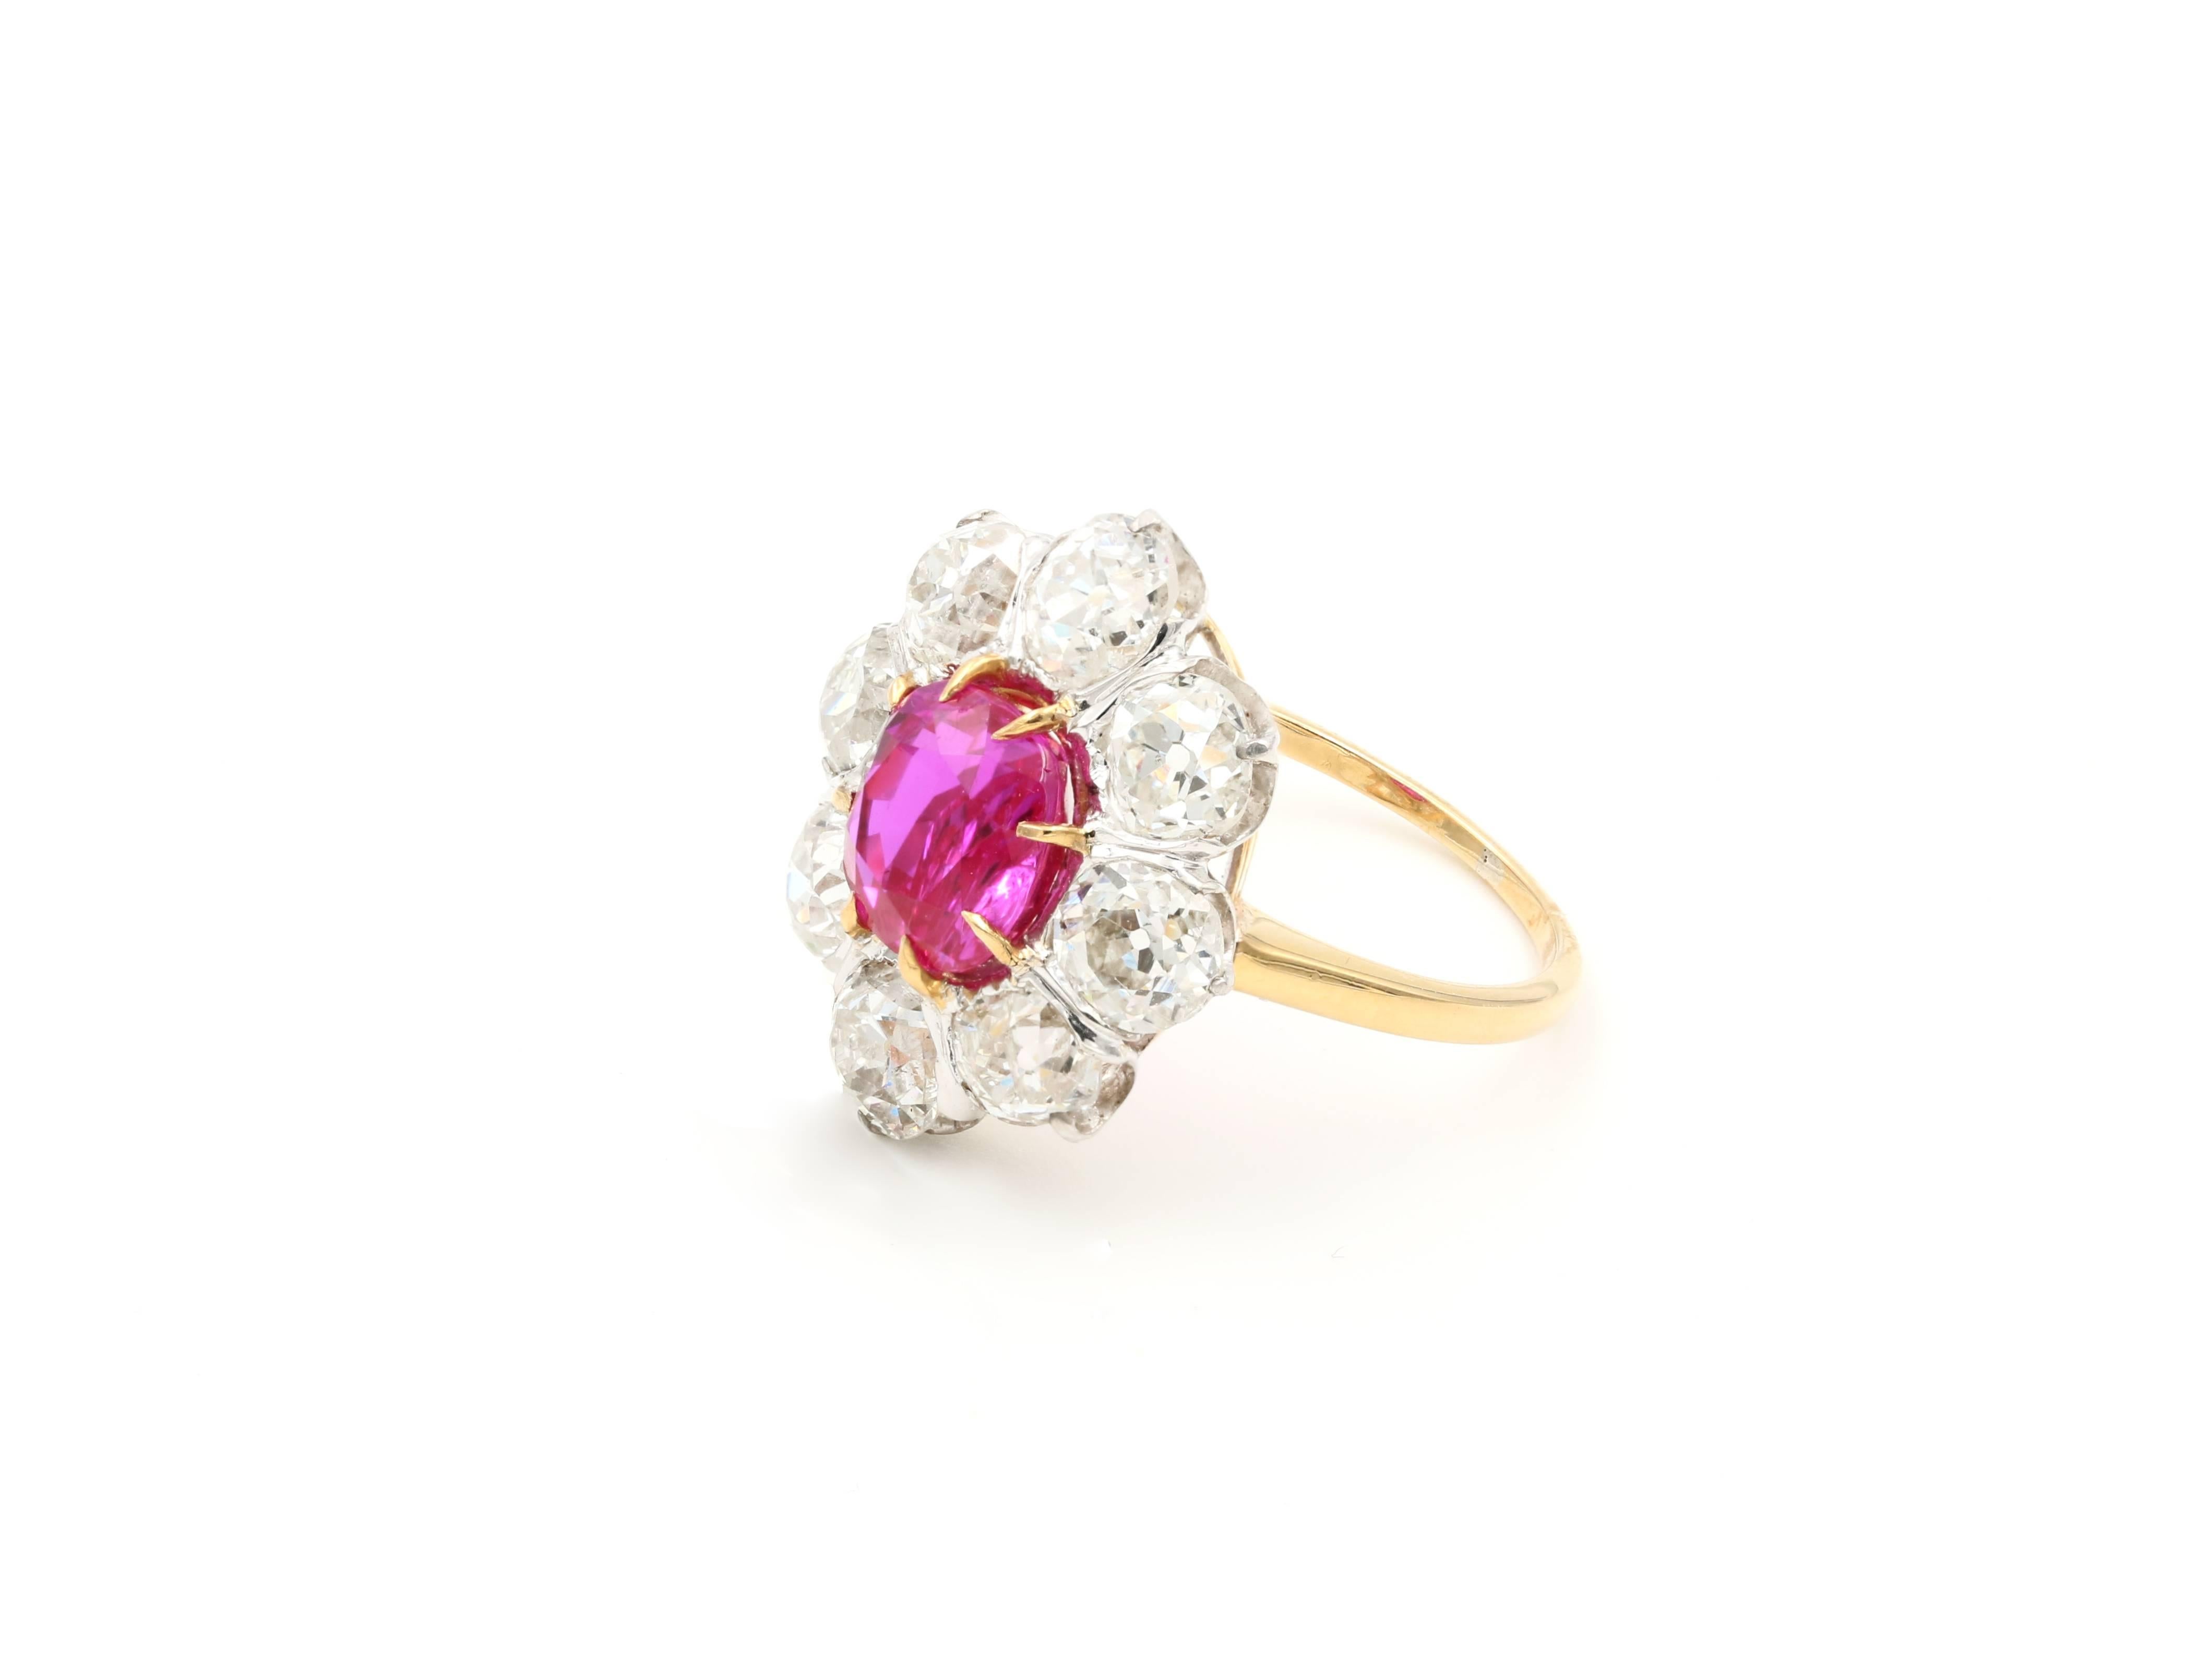 A vintage French ring with a saturate 3.36 carat Unheated Burmese Ruby surrounded by approximately 4 carats of old mine diamonds in a Platinum/18K yellow setting

French hallmarks

Laboratoire de Gemmologie Certificate #195192 “Myanmar (Burma), No